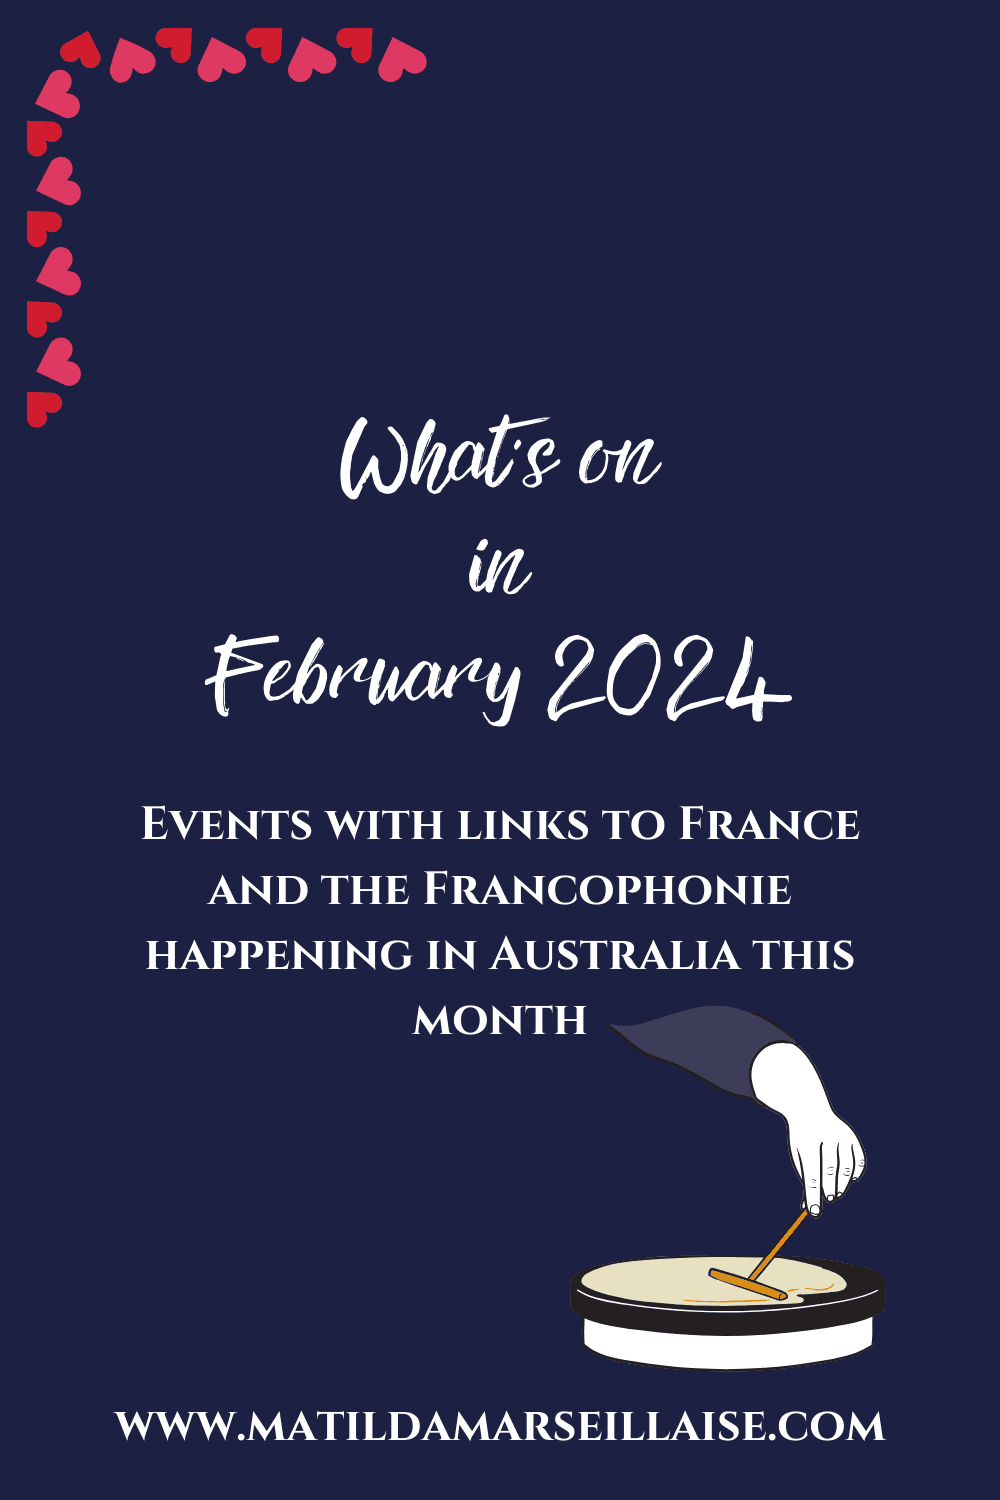 What’s on in February 2024? French and Francophone linked events in Australia